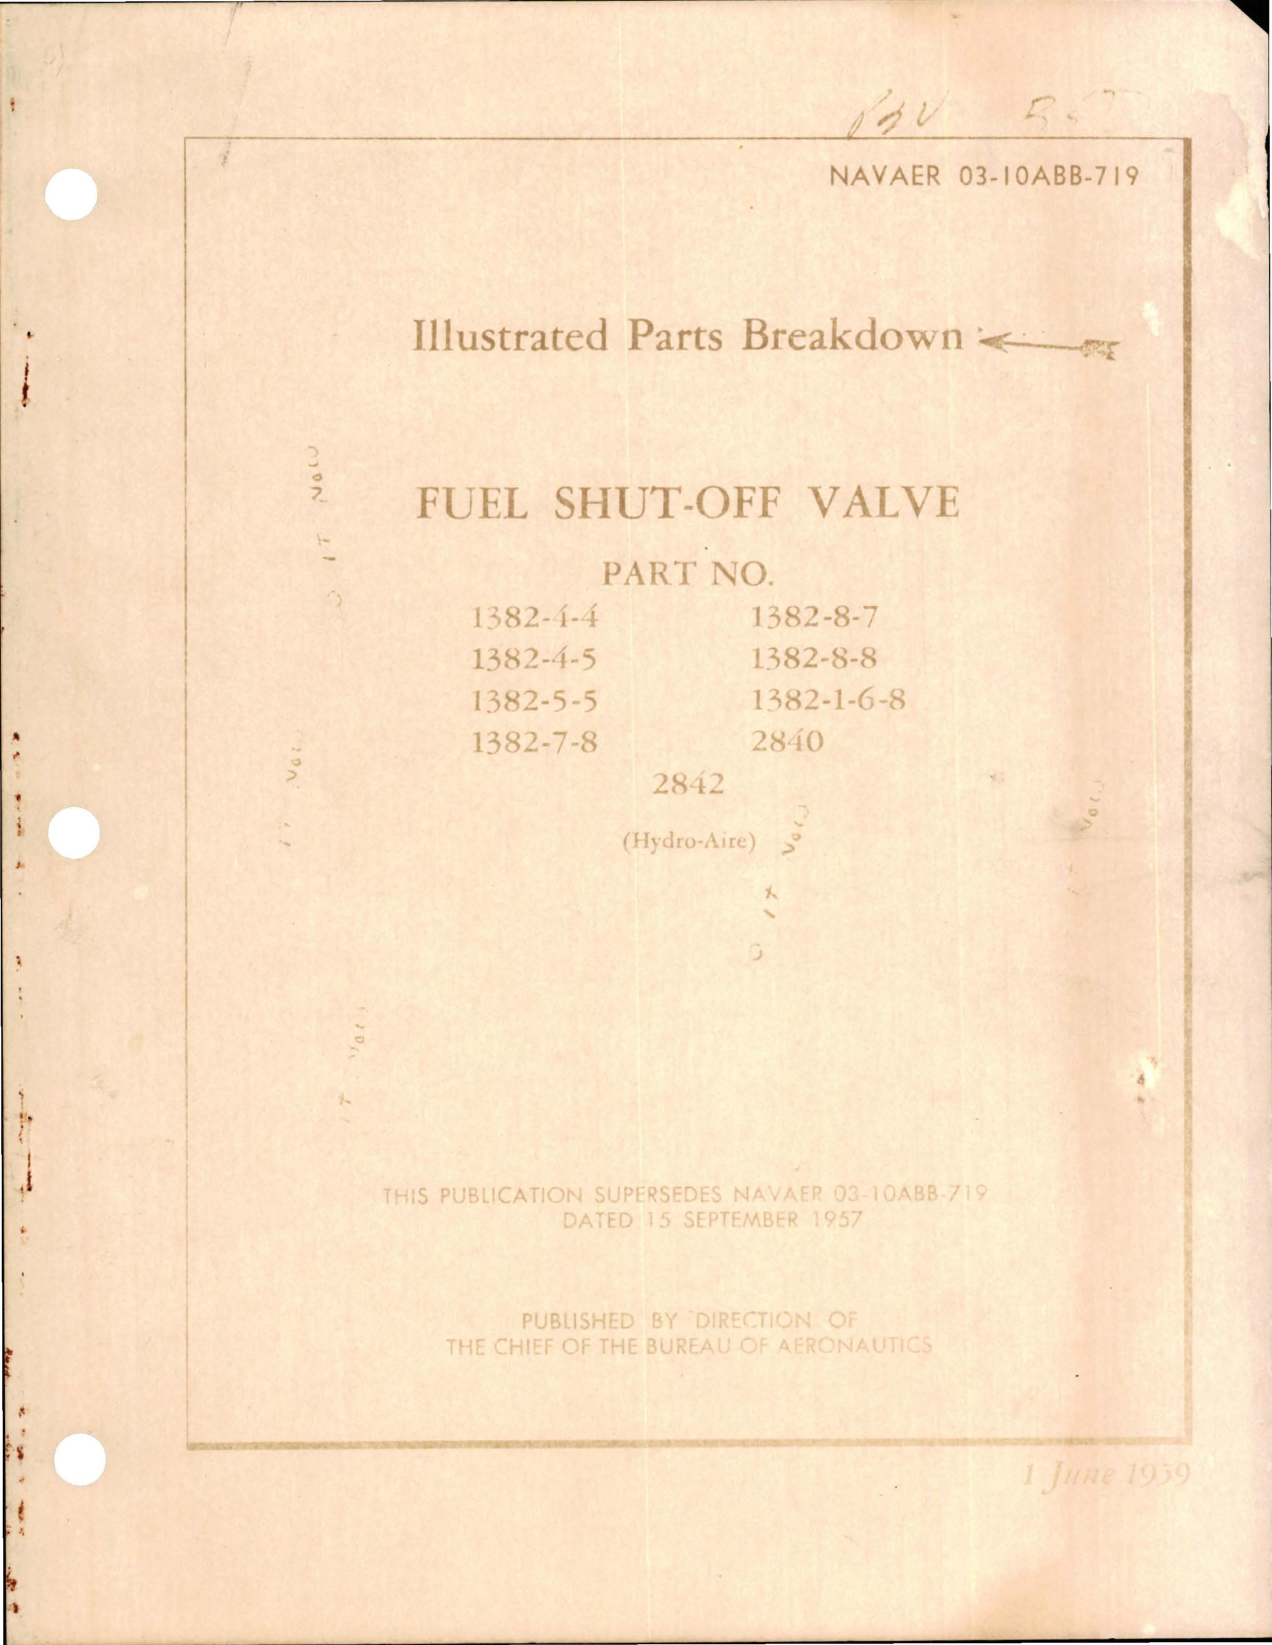 Sample page 1 from AirCorps Library document: Illustrated Parts Breakdown for Fuel Shut-Off Valve